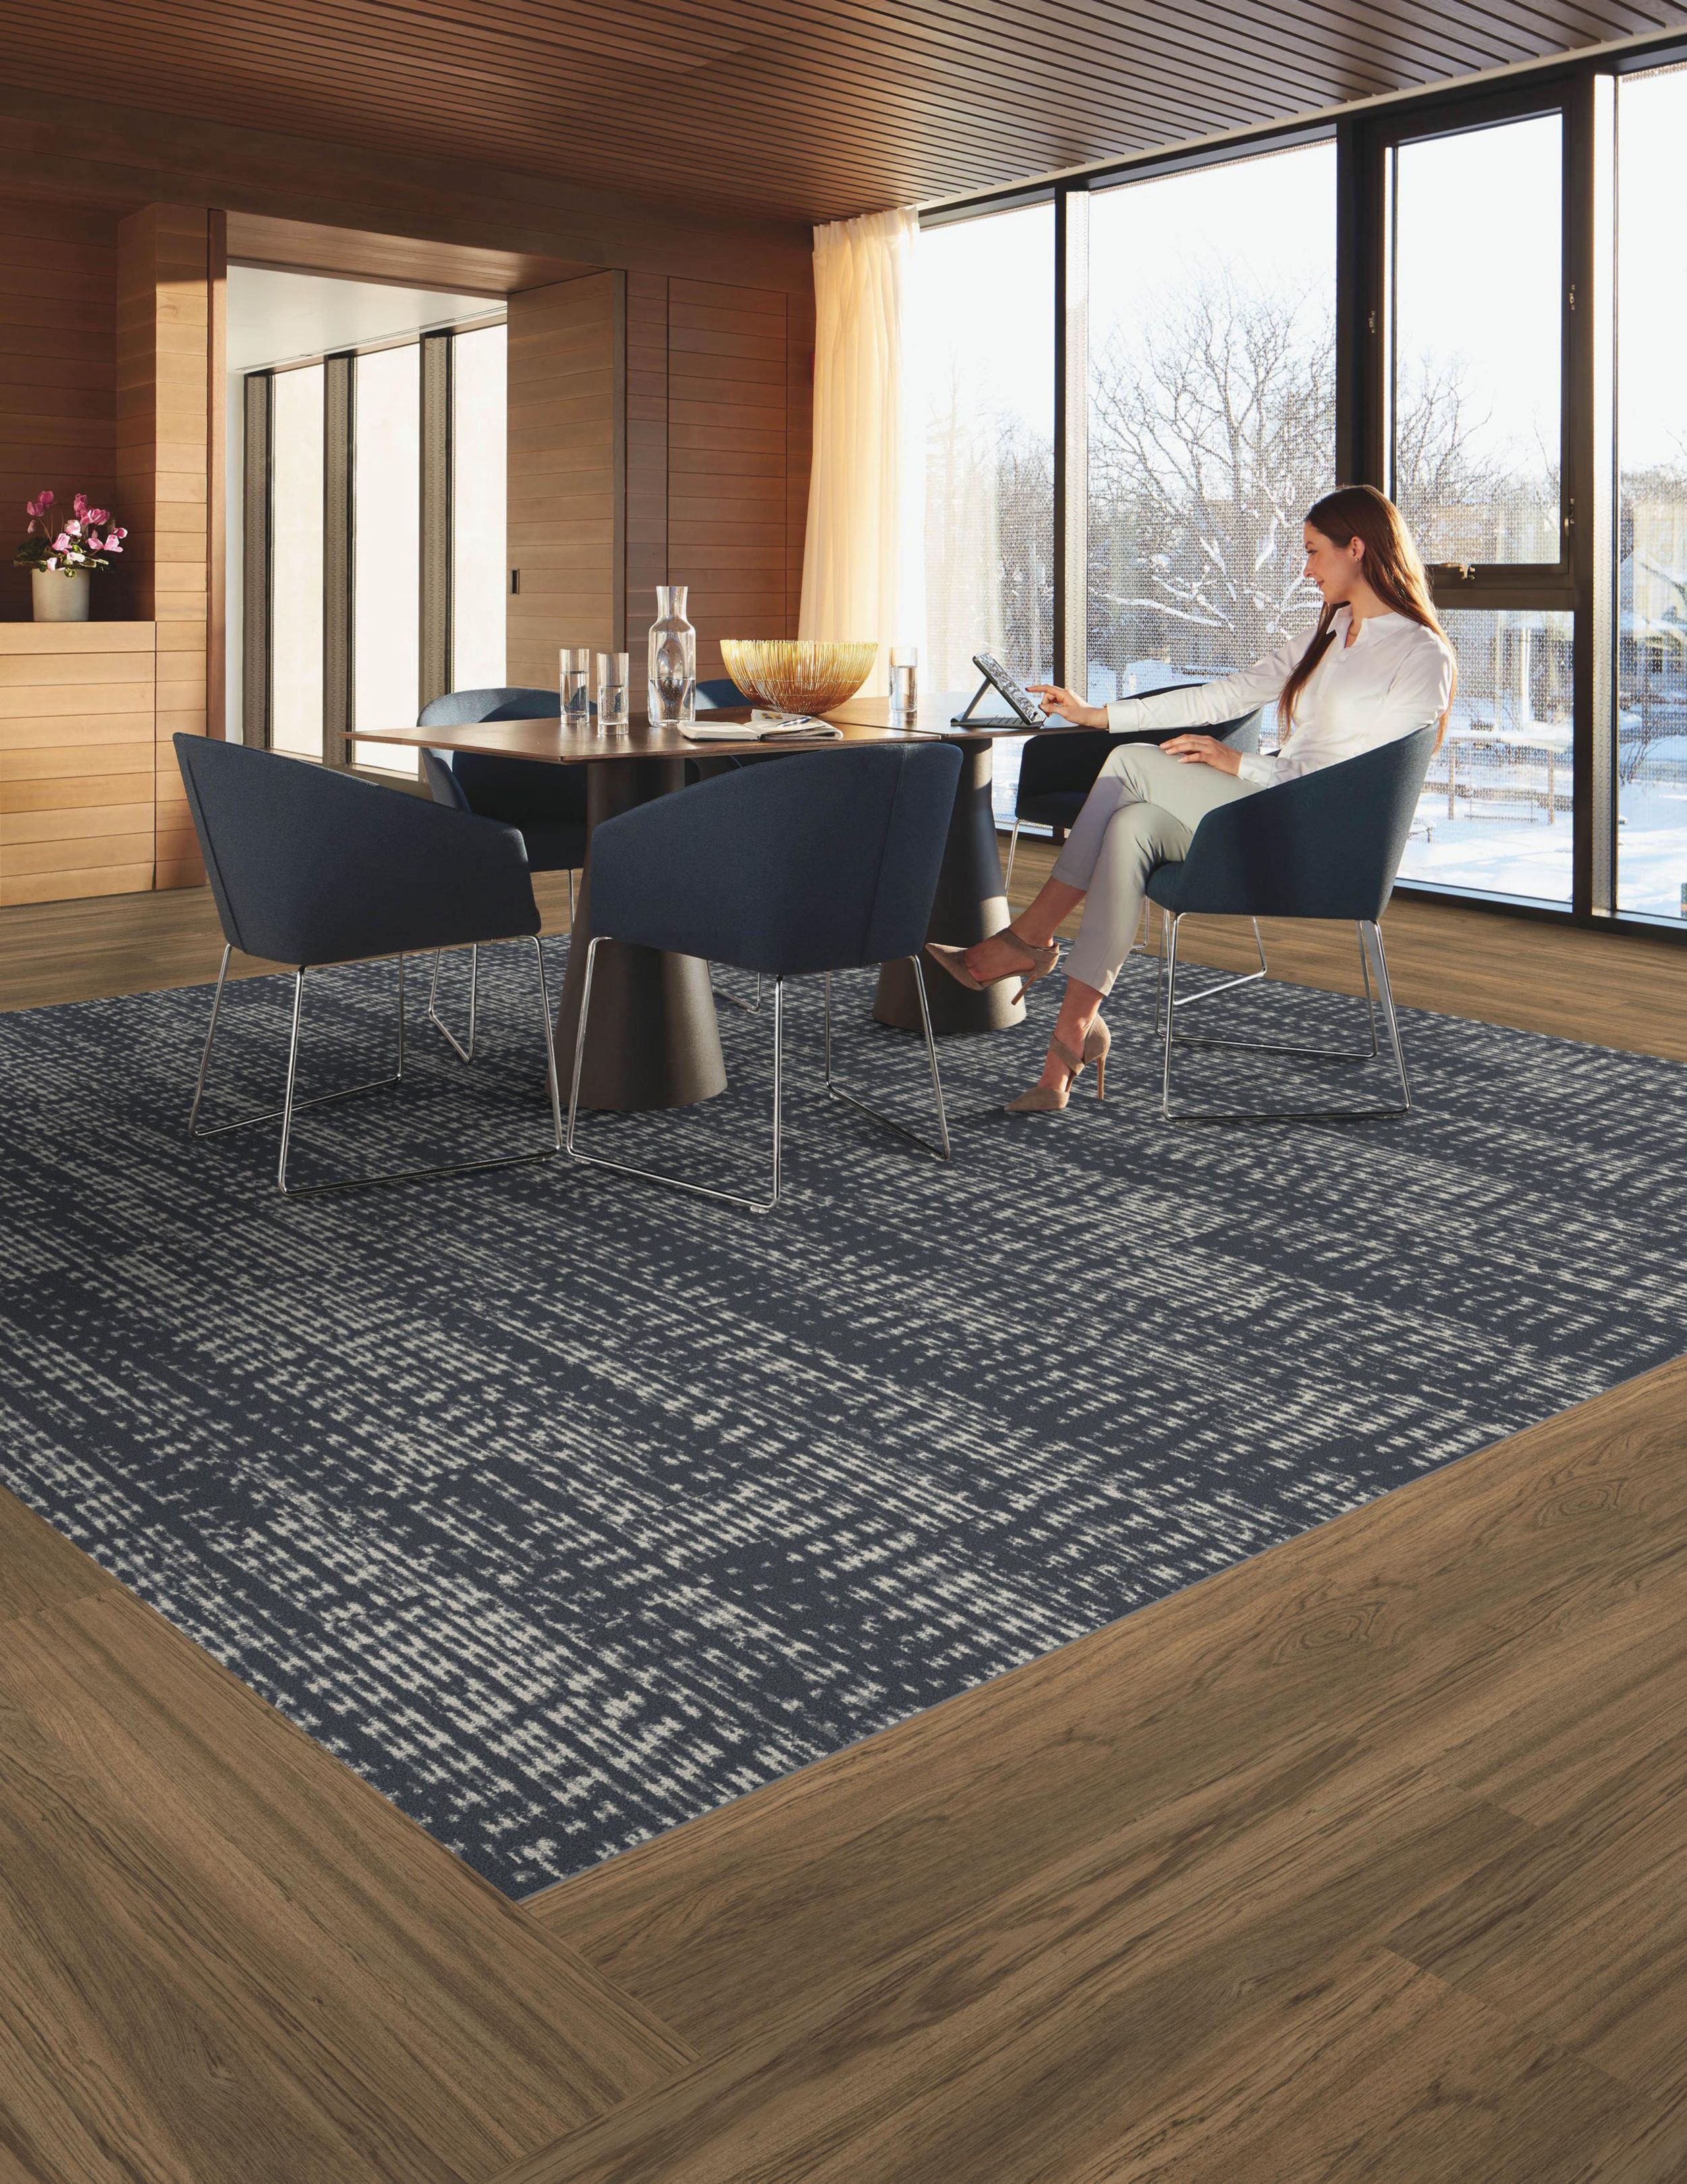 Interface First Edition plank carpet inset as rug into Natural Woodgrains LVT in cafe area with glass walls and wood ceiling numéro d’image 6